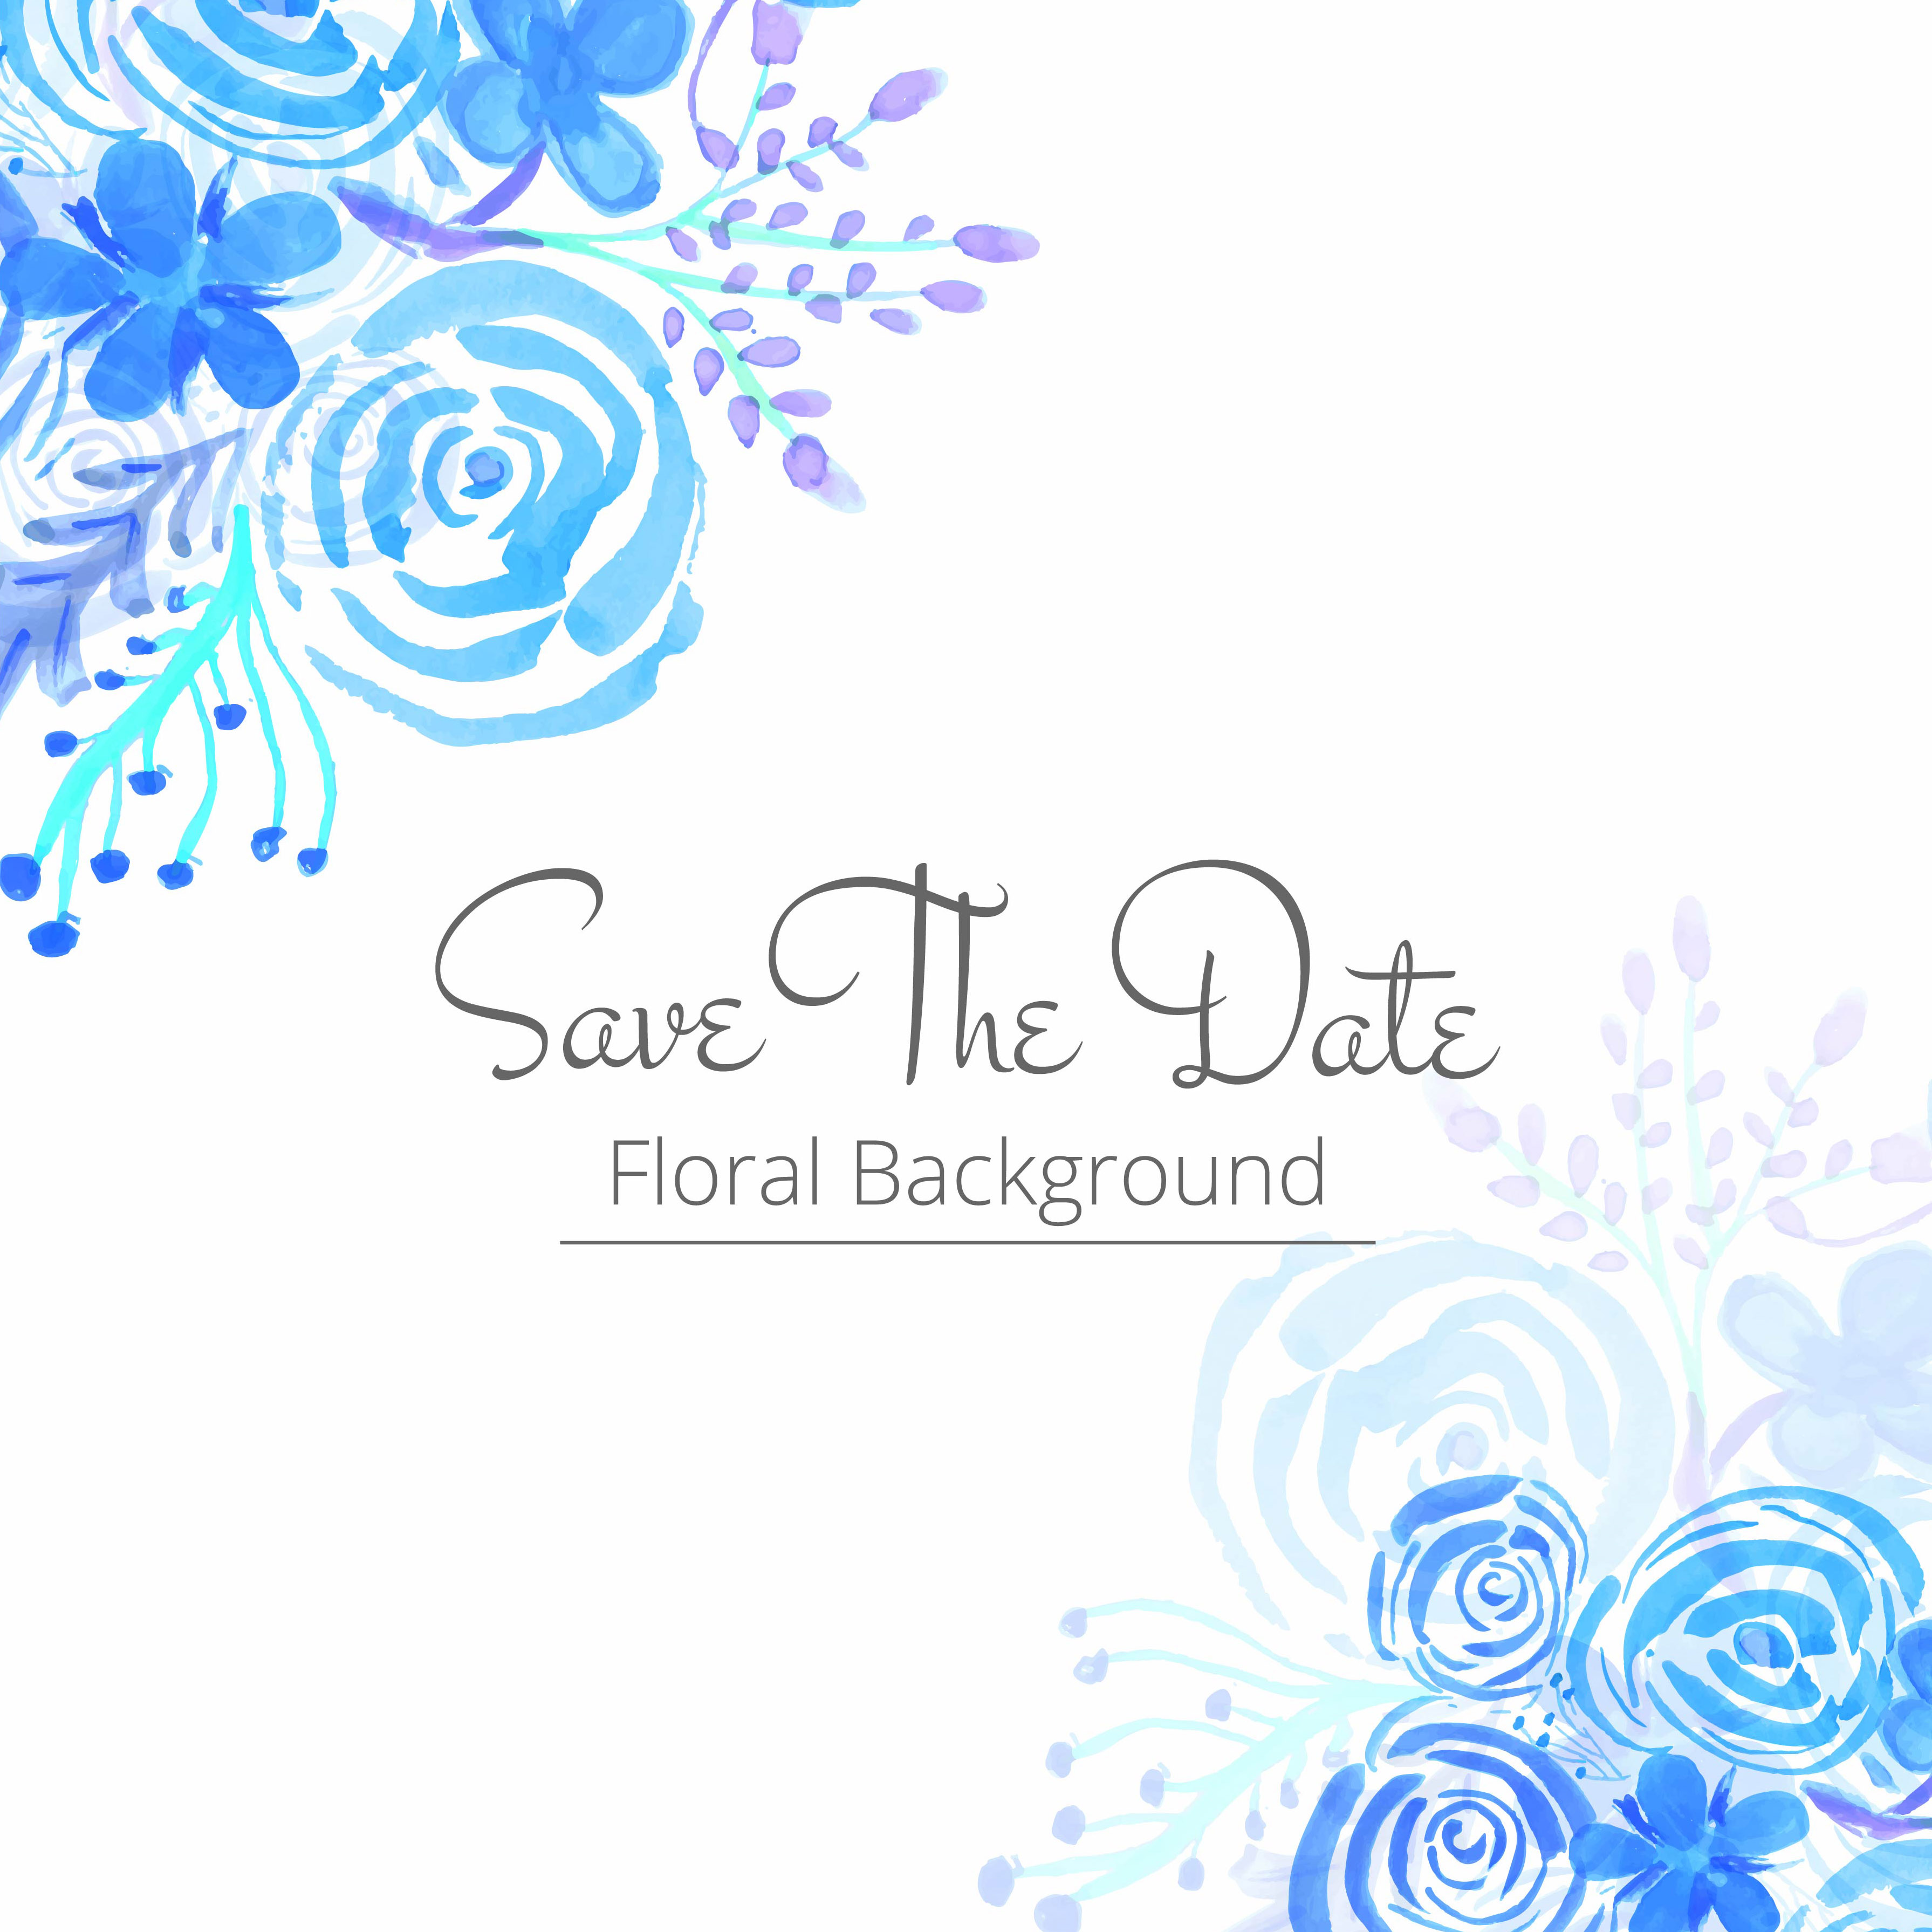  Abstract  watercolor wedding  floral background  237425 